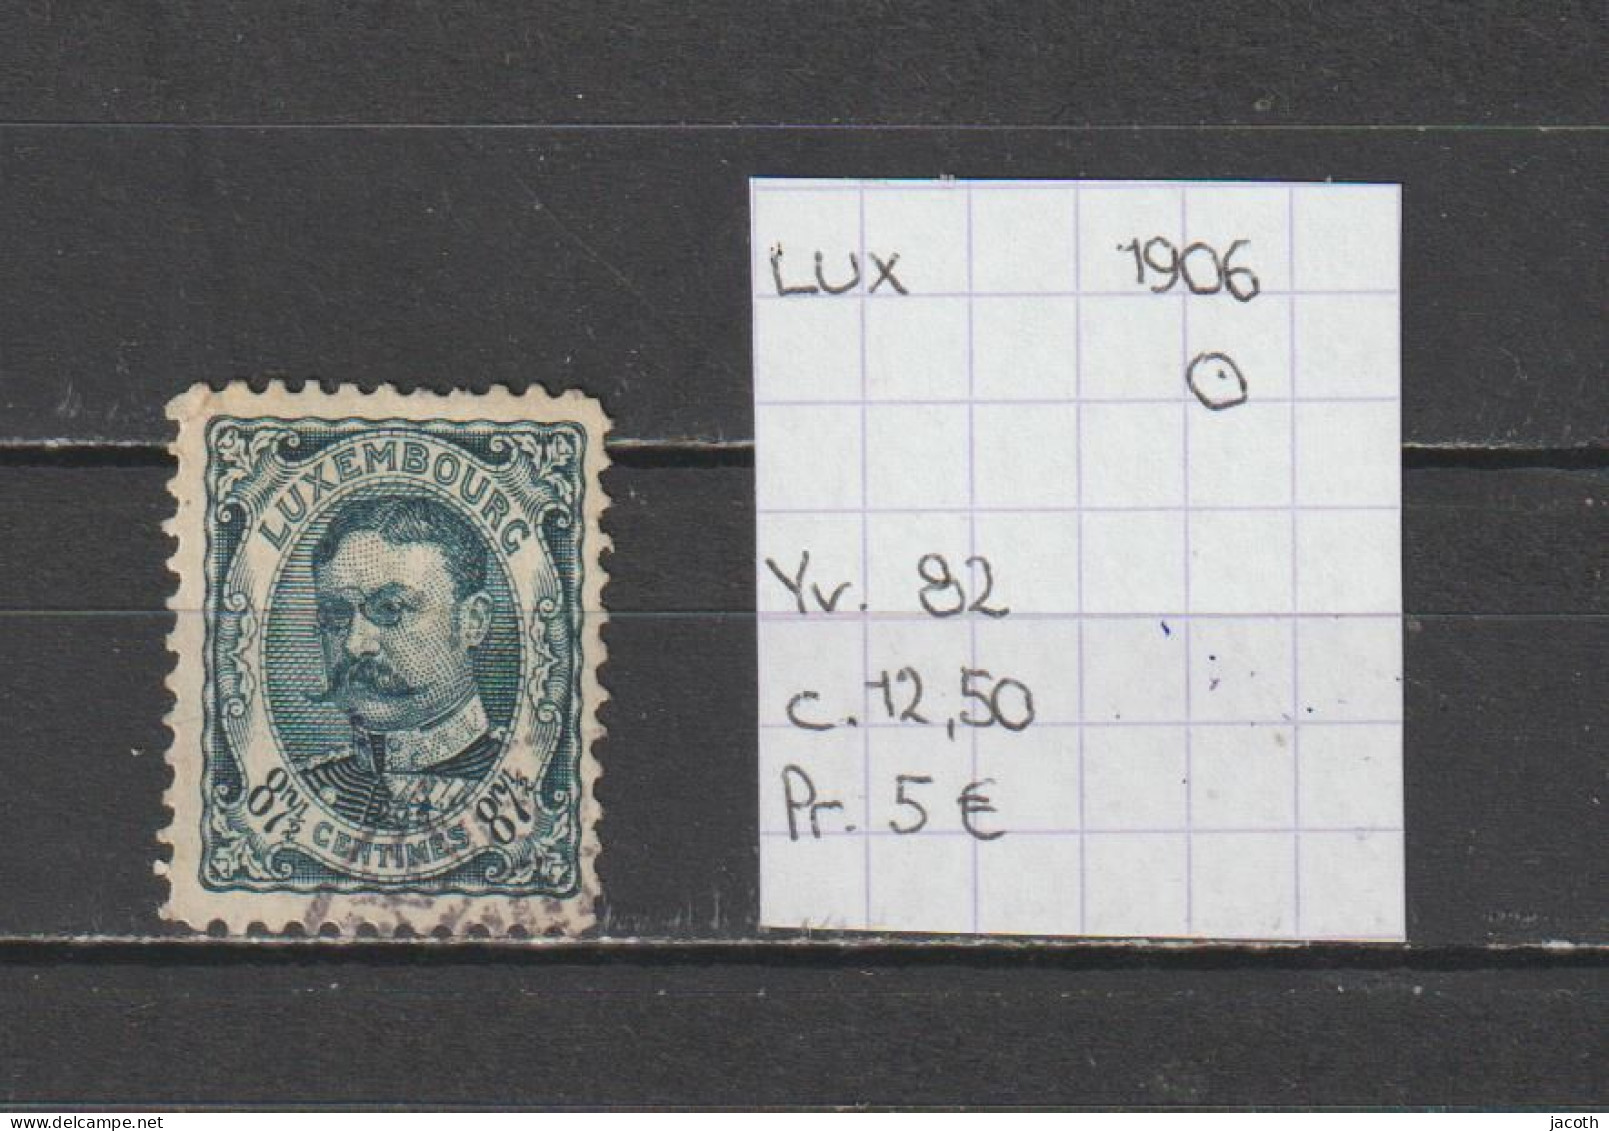 (TJ) Luxembourg 1906 - YT 82 (gest./obl./used) - 1906 Willem IV